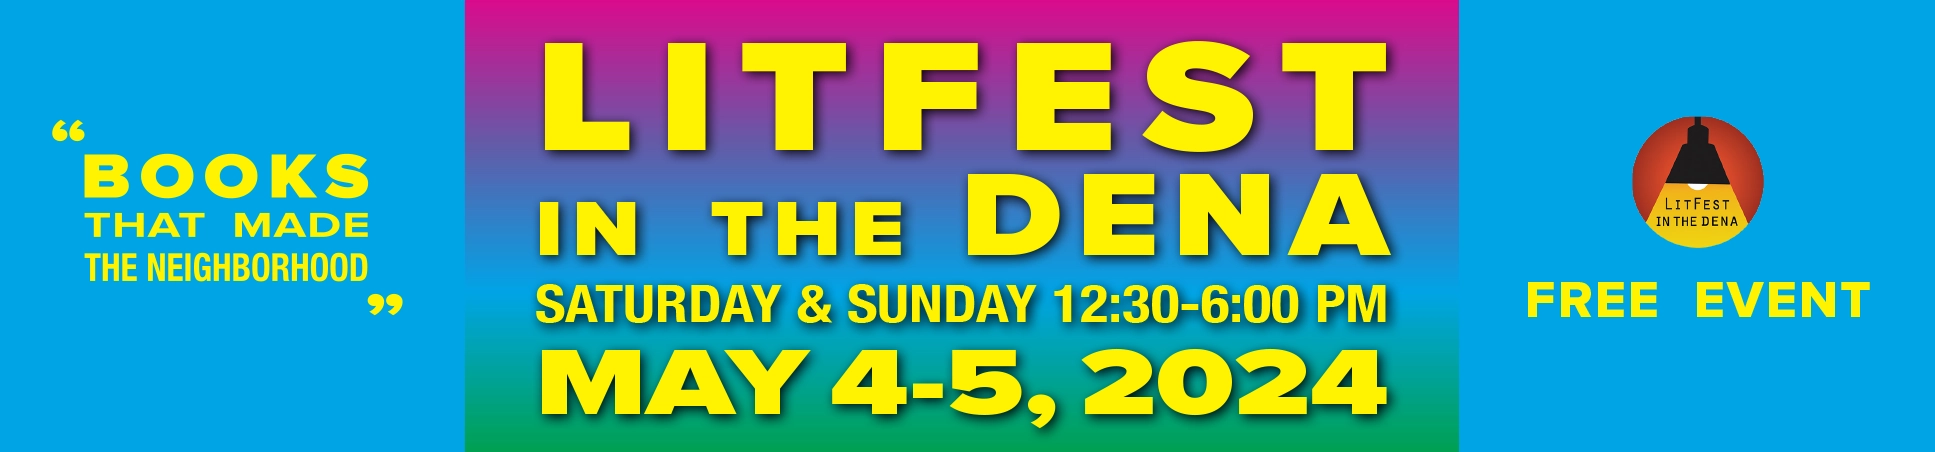 LitFest in the Dena Saturday and Sunday 12:30-6pm May 4-5 2004